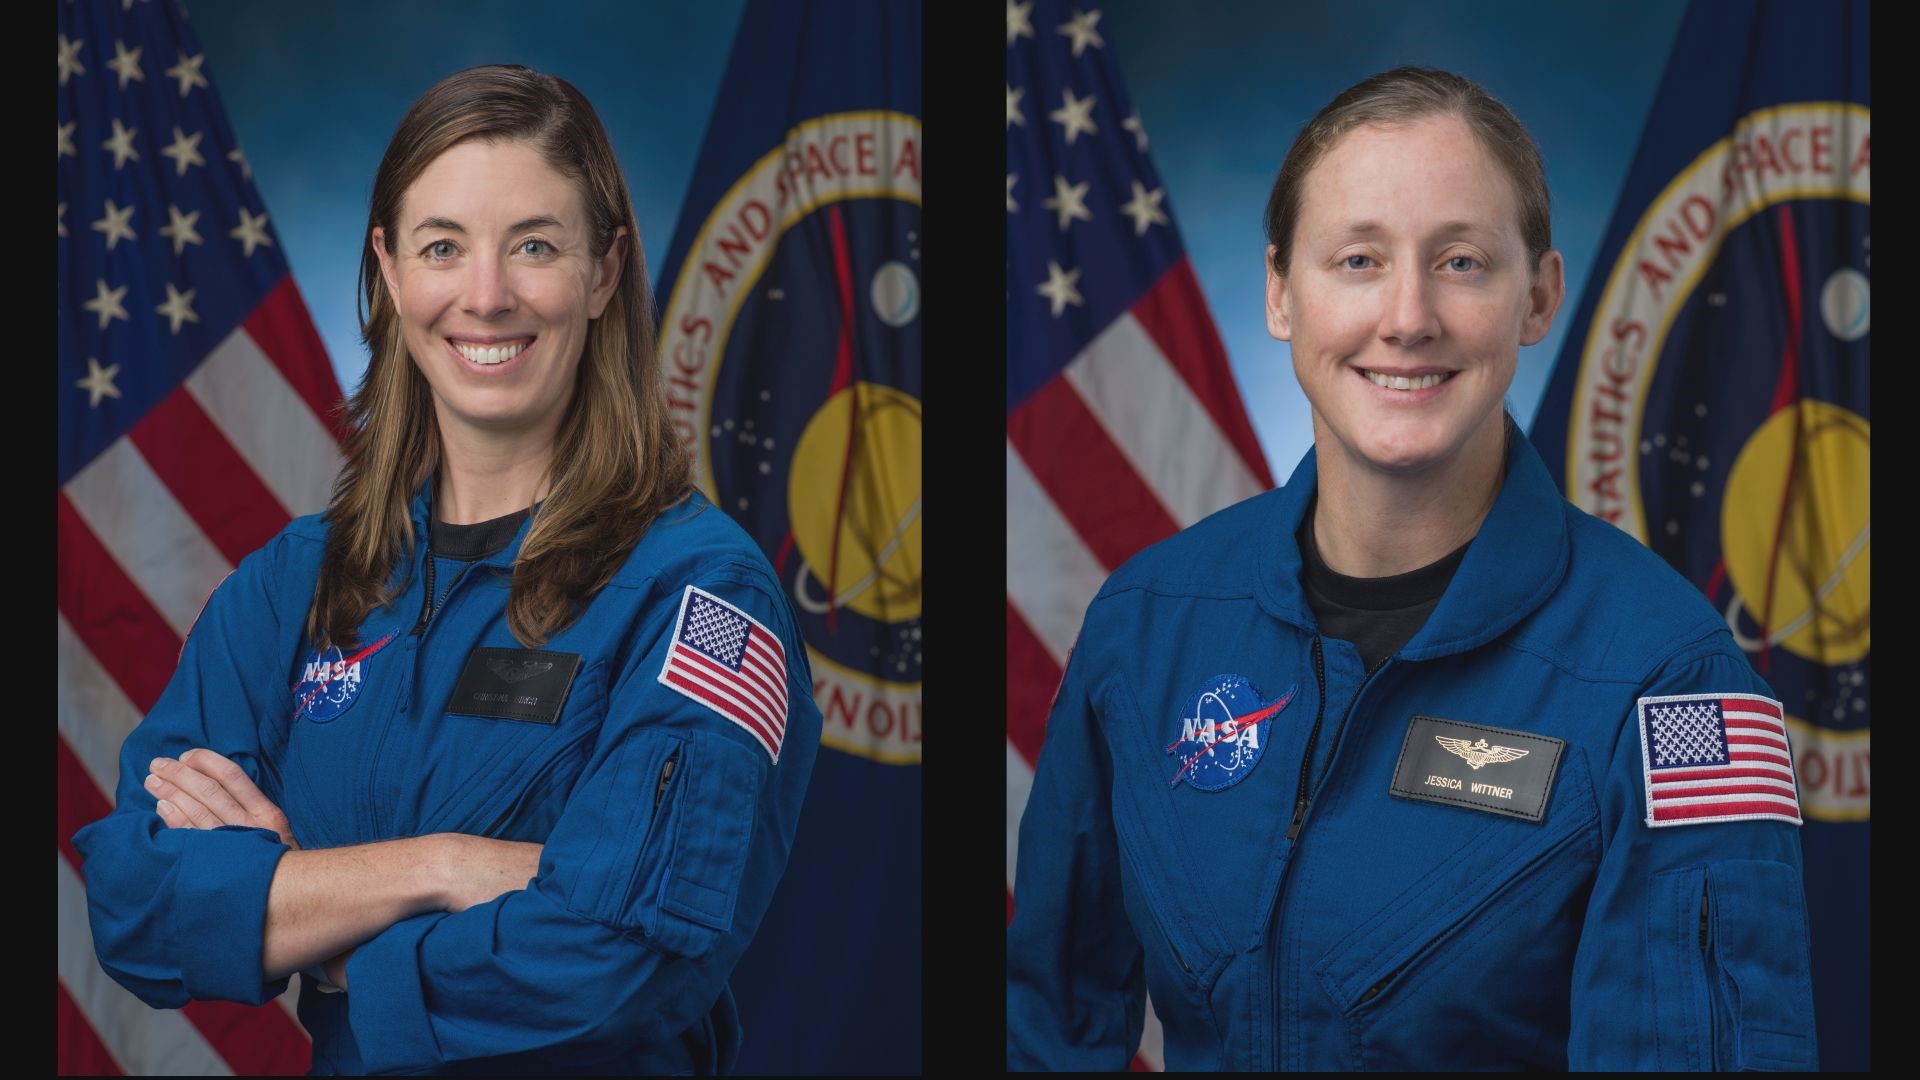 NASA announced its newest class of astronaut candidates on Monday. Christina Birtch and Jessica Wittner were among the hopefuls chosen out of 12,000 applicants.